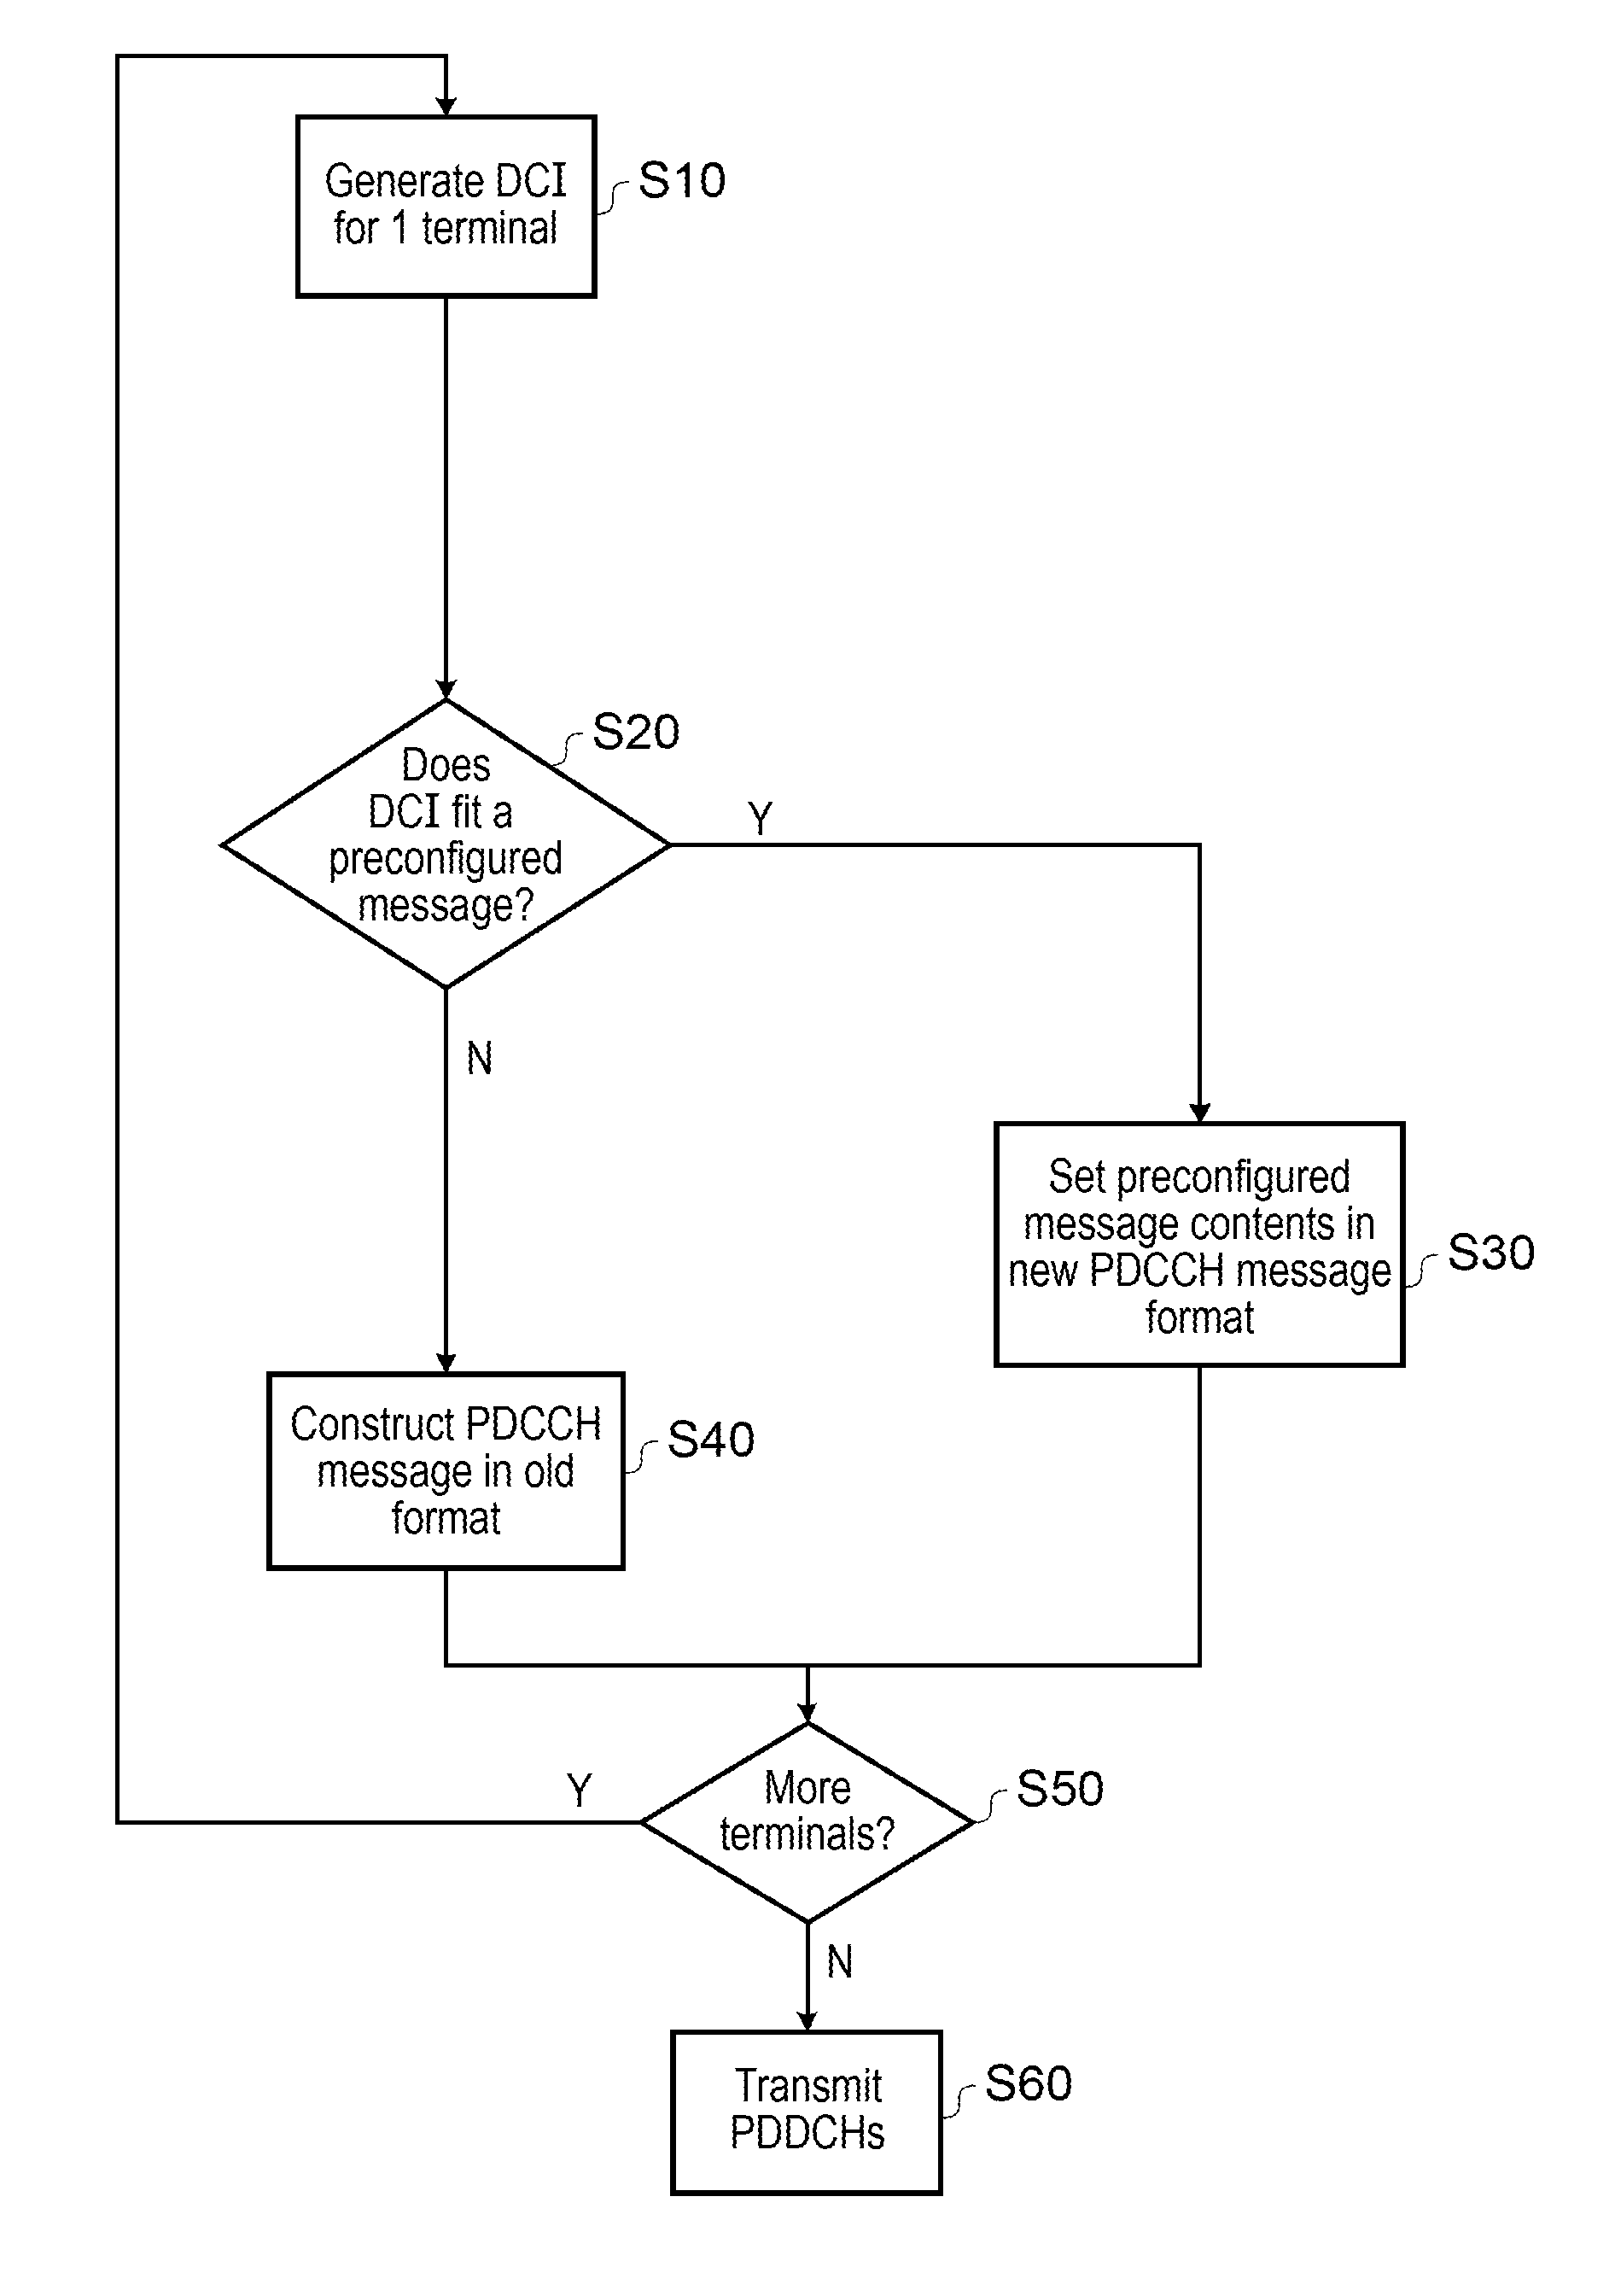 Control channel for wireless communication